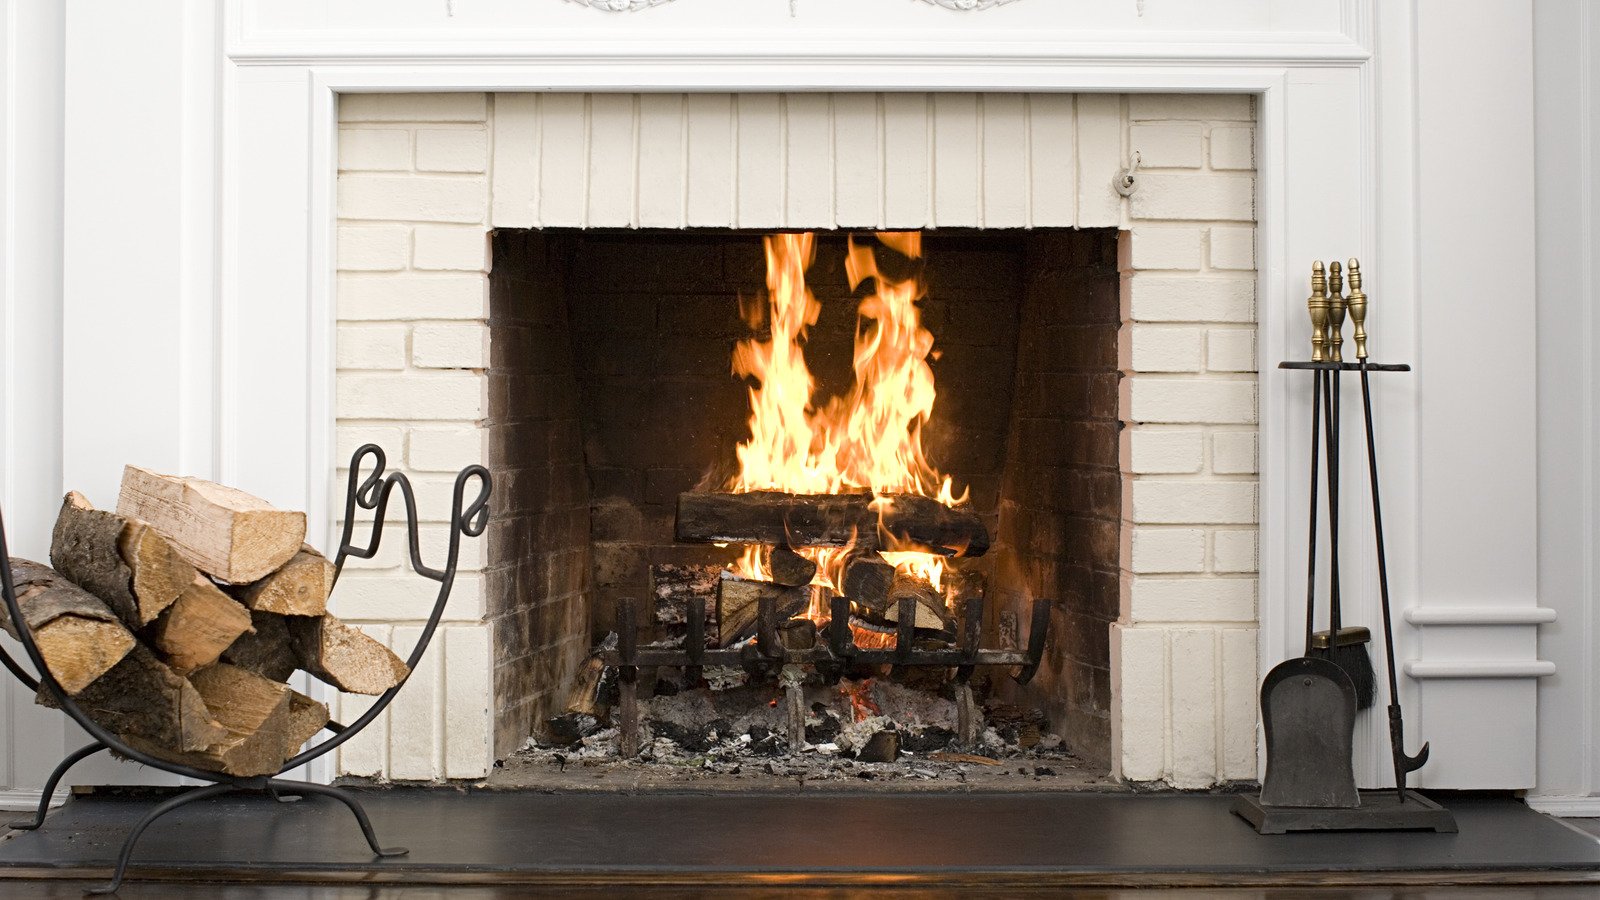 10 Homemade Fire Starter Ideas To Keep You Warm In Winter